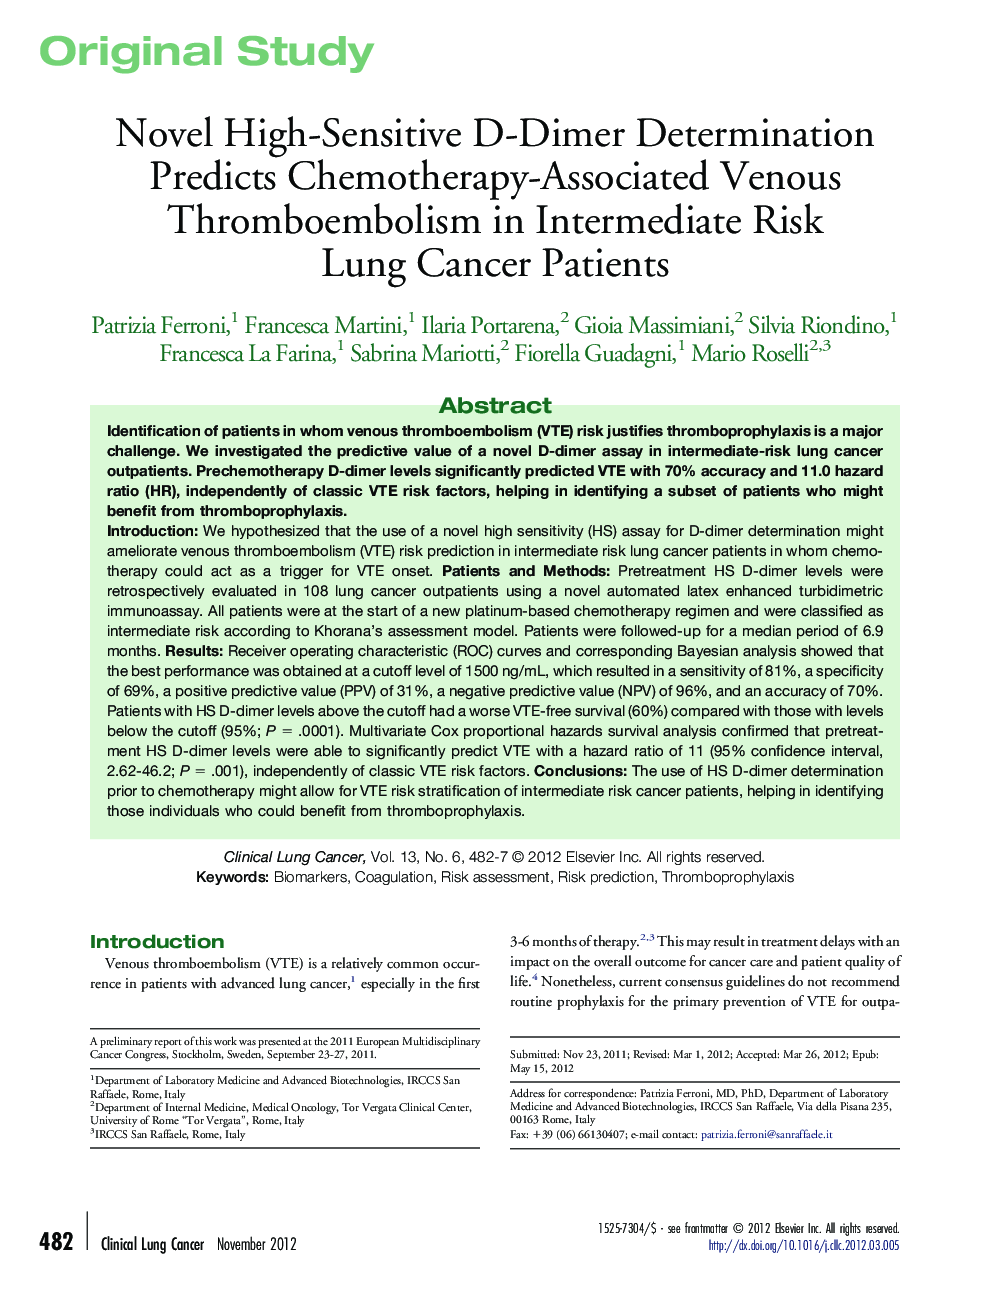 Novel High-Sensitive D-Dimer Determination Predicts Chemotherapy-Associated Venous Thromboembolism in Intermediate Risk Lung Cancer Patients